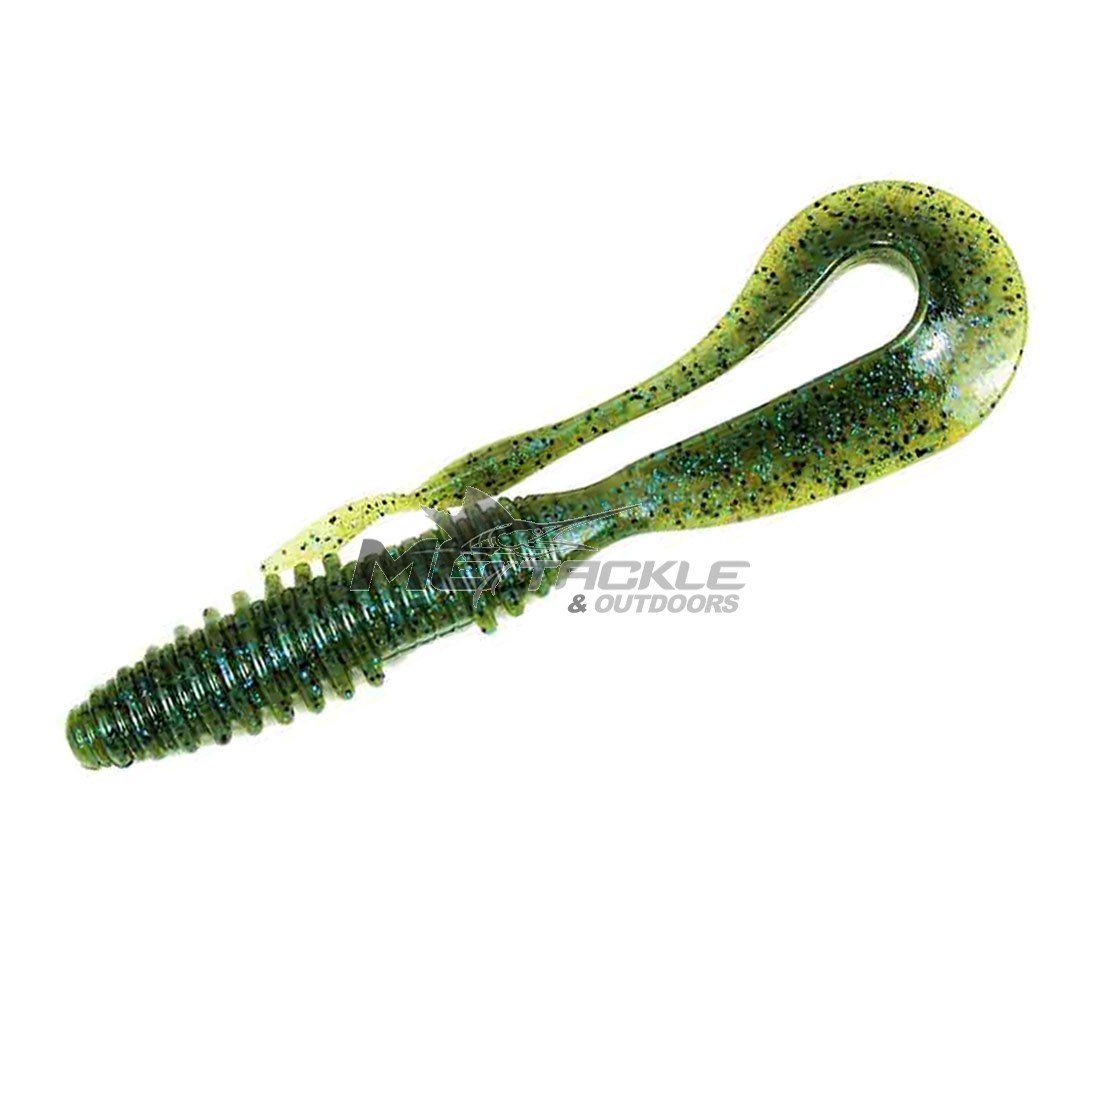 Keitech Mad Wag  MoTackle & Outdoors